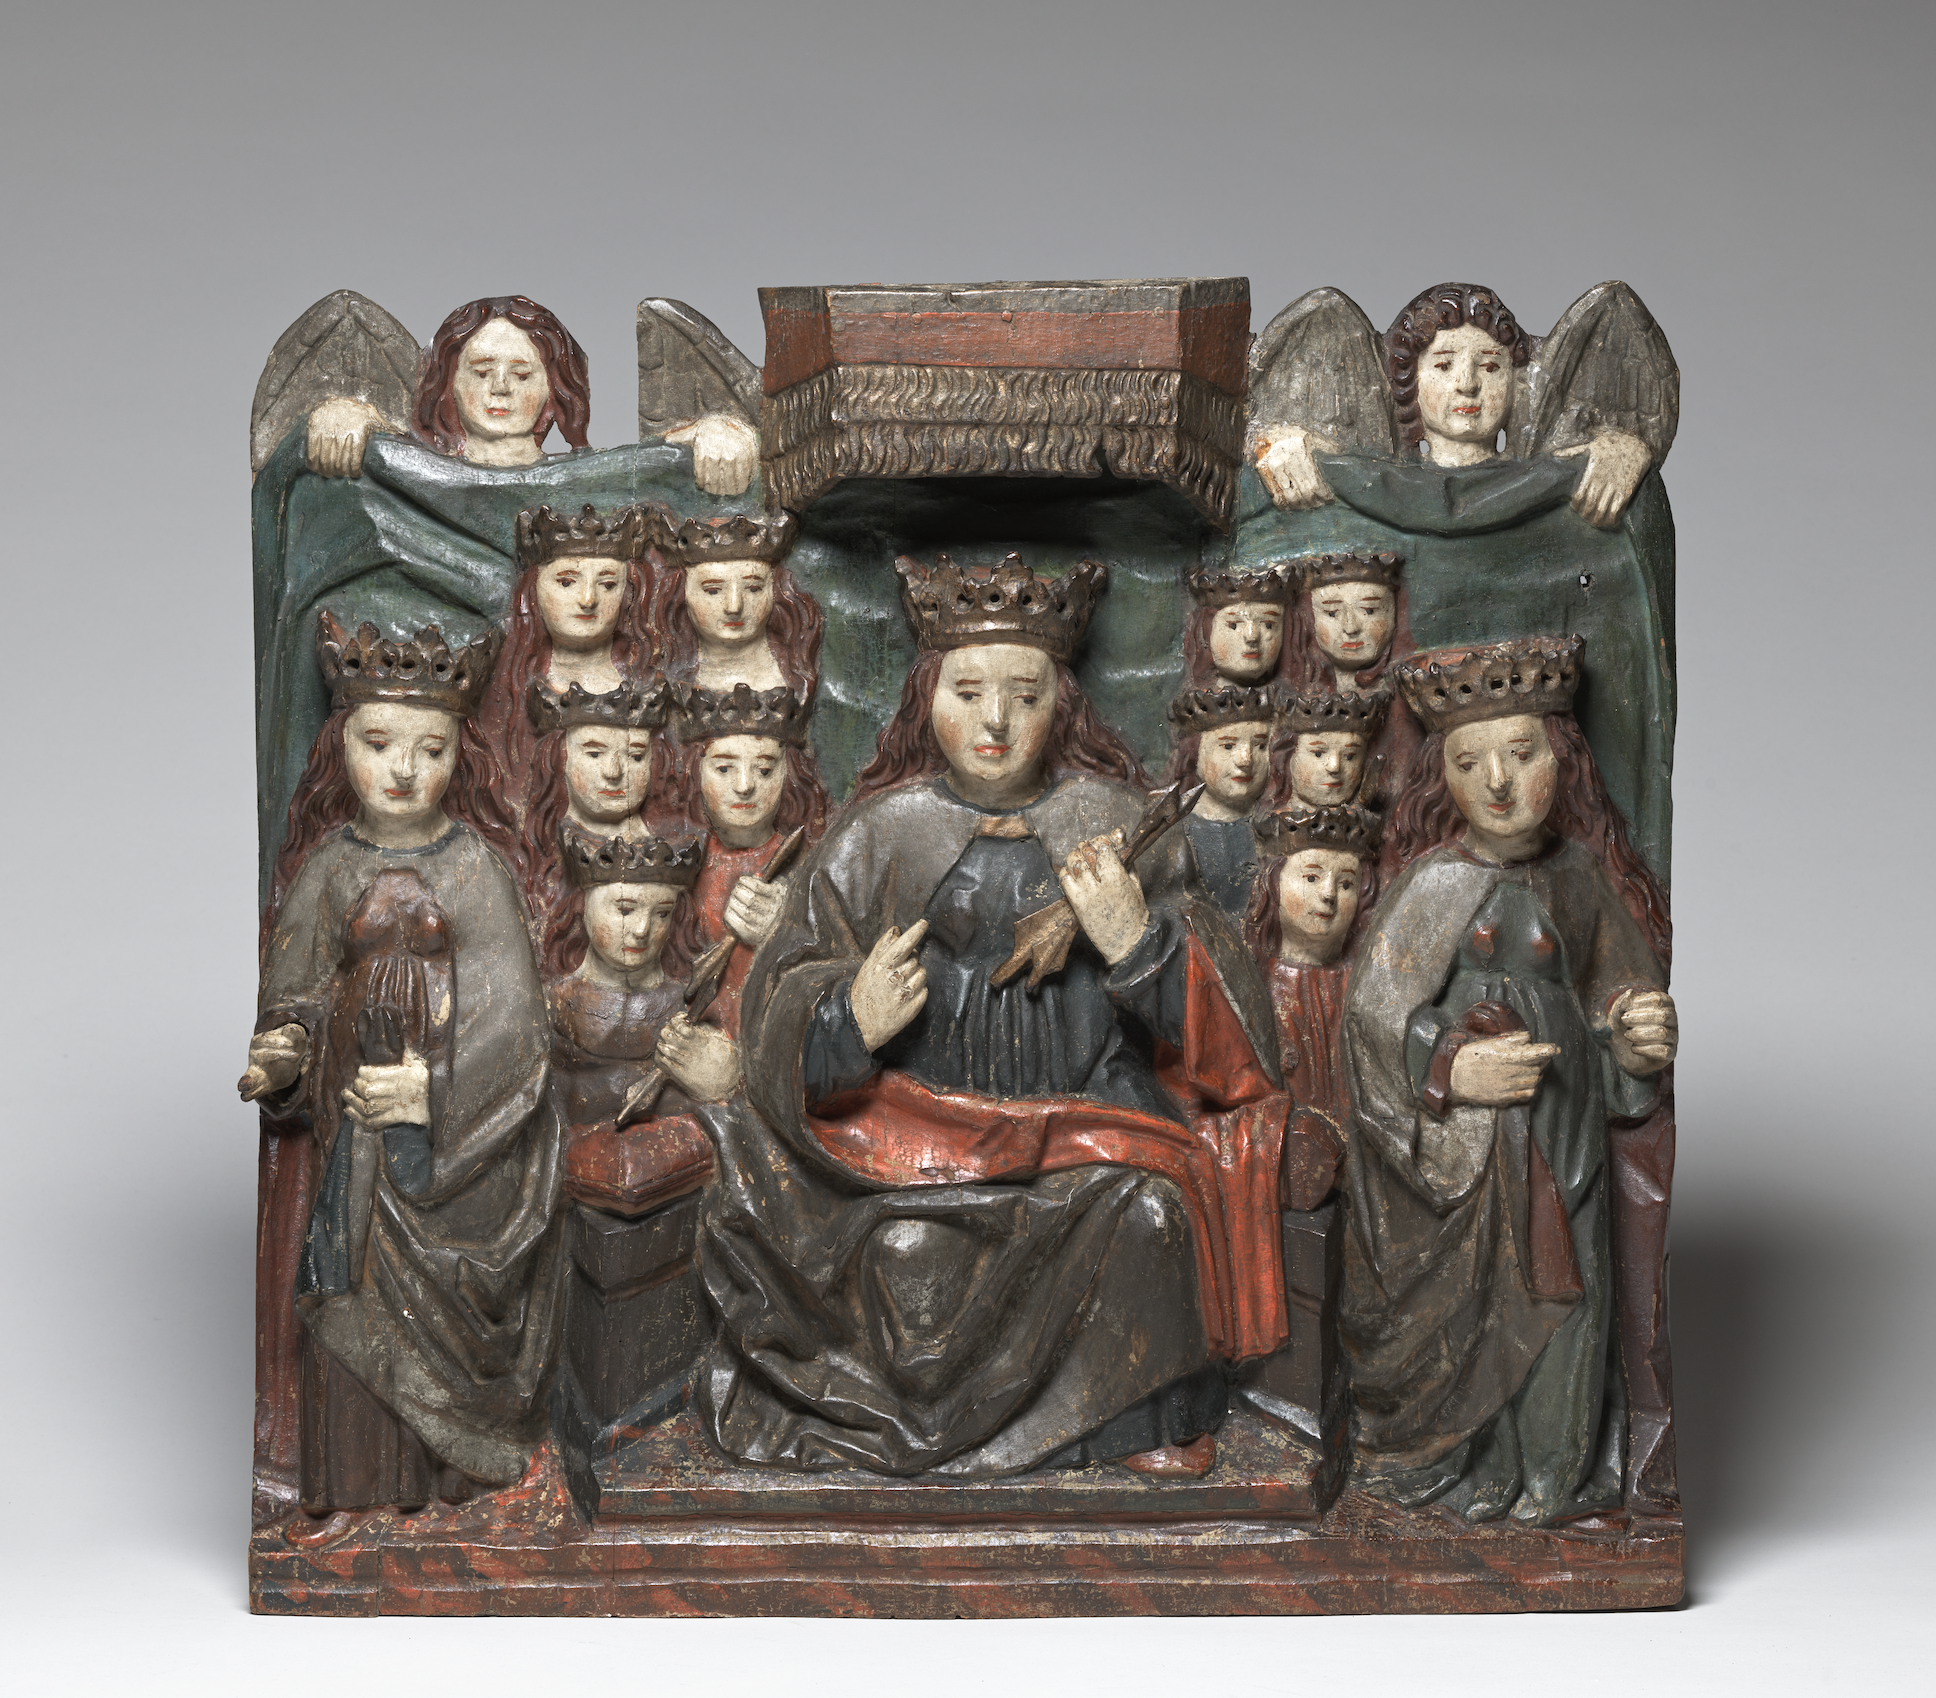 Painted wood sculpture of Saint Ursula and the Virgin Martyrs, featuring Saint Ursula crowned, enthroned and under a canopy at center surrounded by twelve crowned female figures of varying sizes, all set against a green curtain held at the top by two angels. 